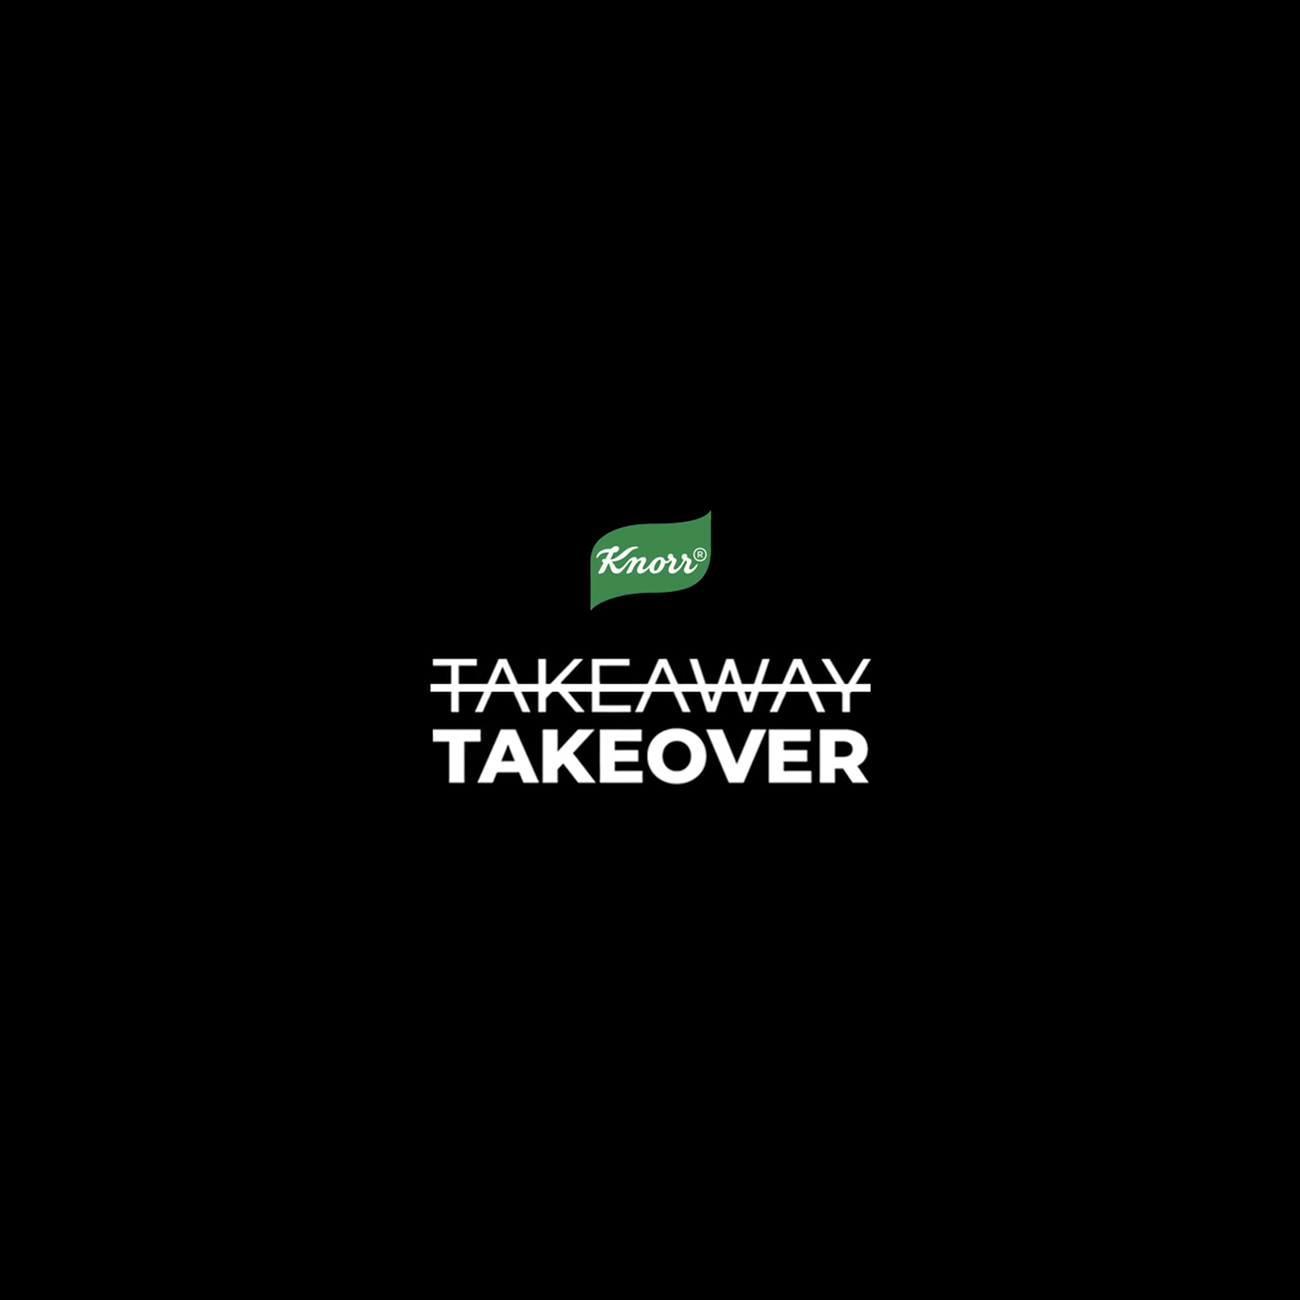 Knorr - Takeaway Takeover